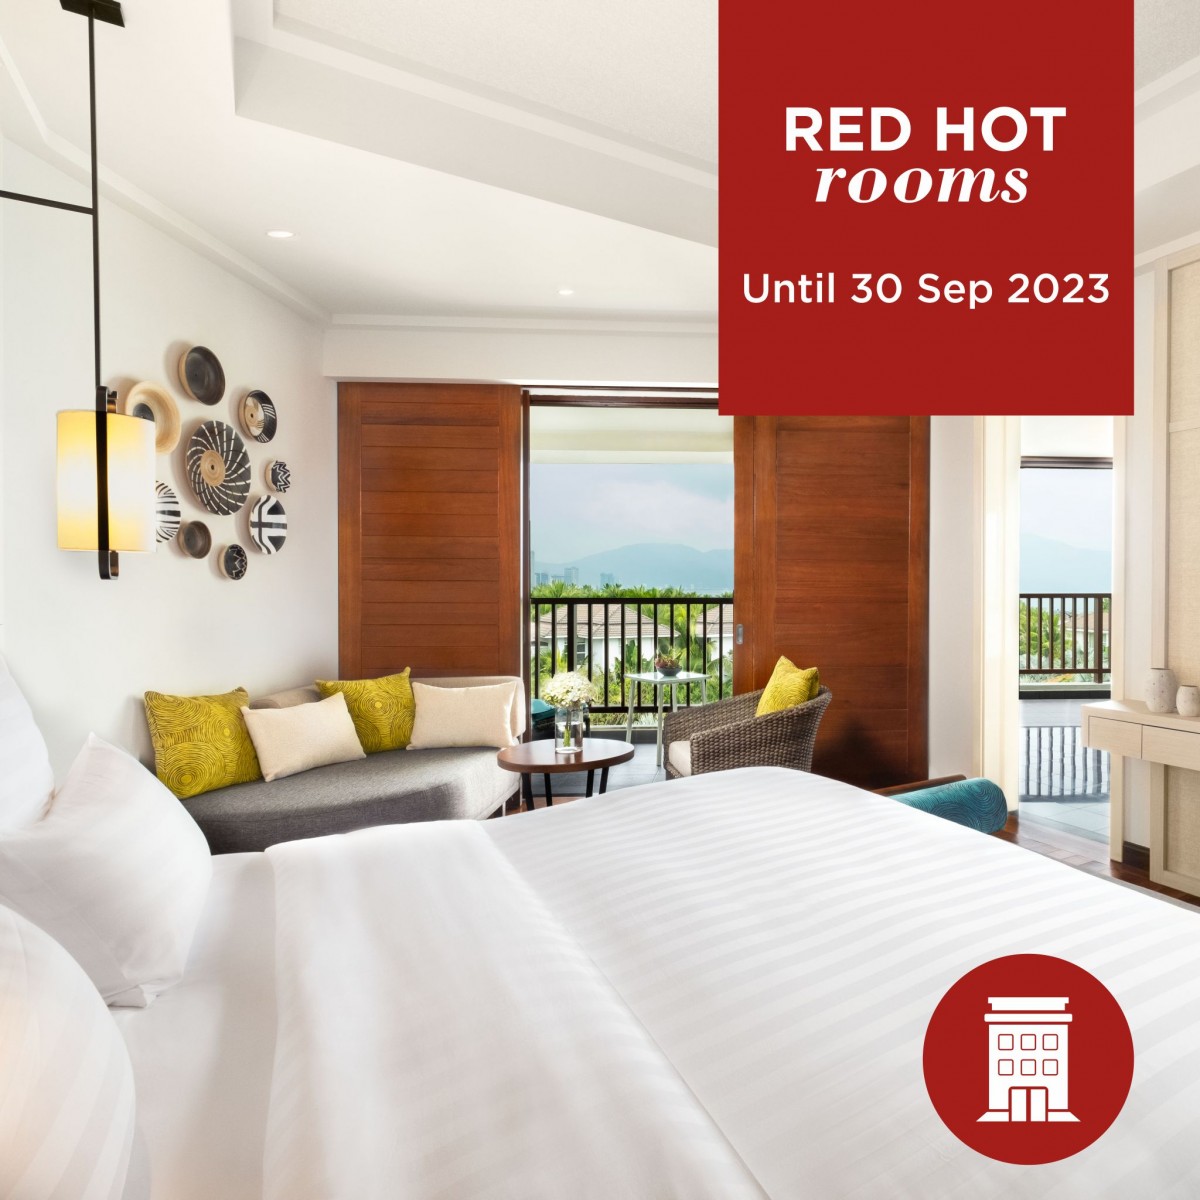 Red Hot Rooms